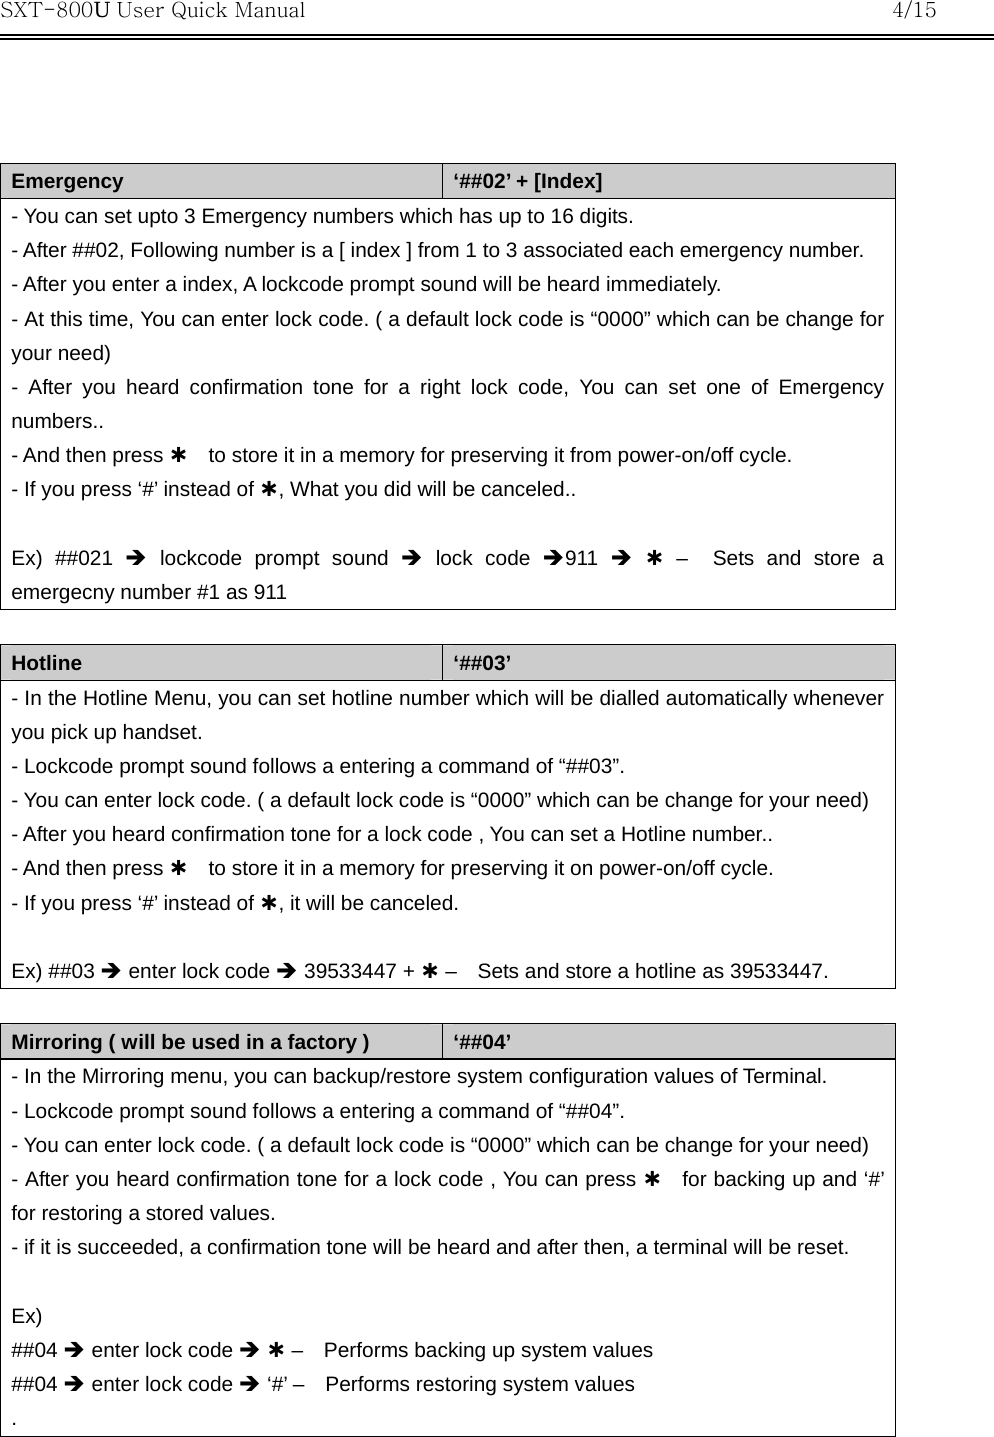 SXT-800U User Quick Manual           4/15     Emergency  ‘##02’ + [Index] - You can set upto 3 Emergency numbers which has up to 16 digits. - After ##02, Following number is a [ index ] from 1 to 3 associated each emergency number. - After you enter a index, A lockcode prompt sound will be heard immediately. - At this time, You can enter lock code. ( a default lock code is “0000” which can be change for your need) - After you heard confirmation tone for a right lock code, You can set one of Emergency numbers.. - And then press À    to store it in a memory for preserving it from power-on/off cycle. - If you press ‘#’ instead of À, What you did will be canceled..   Ex) ##021 Î lockcode prompt sound Î lock code Î911  Î À –  Sets and store a emergecny number #1 as 911  Hotline  ‘##03’ - In the Hotline Menu, you can set hotline number which will be dialled automatically whenever you pick up handset. - Lockcode prompt sound follows a entering a command of “##03”. - You can enter lock code. ( a default lock code is “0000” which can be change for your need) - After you heard confirmation tone for a lock code , You can set a Hotline number.. - And then press À    to store it in a memory for preserving it on power-on/off cycle. - If you press ‘#’ instead of À, it will be canceled.  Ex) ##03 Î enter lock code Î 39533447 + À –    Sets and store a hotline as 39533447.  Mirroring ( will be used in a factory )  ‘##04’ - In the Mirroring menu, you can backup/restore system configuration values of Terminal. - Lockcode prompt sound follows a entering a command of “##04”. - You can enter lock code. ( a default lock code is “0000” which can be change for your need) - After you heard confirmation tone for a lock code , You can press À  for backing up and ‘#’ for restoring a stored values. - if it is succeeded, a confirmation tone will be heard and after then, a terminal will be reset.  Ex)  ##04 Î enter lock code Î À –    Performs backing up system values ##04 Î enter lock code Î ‘#’ –    Performs restoring system values .  